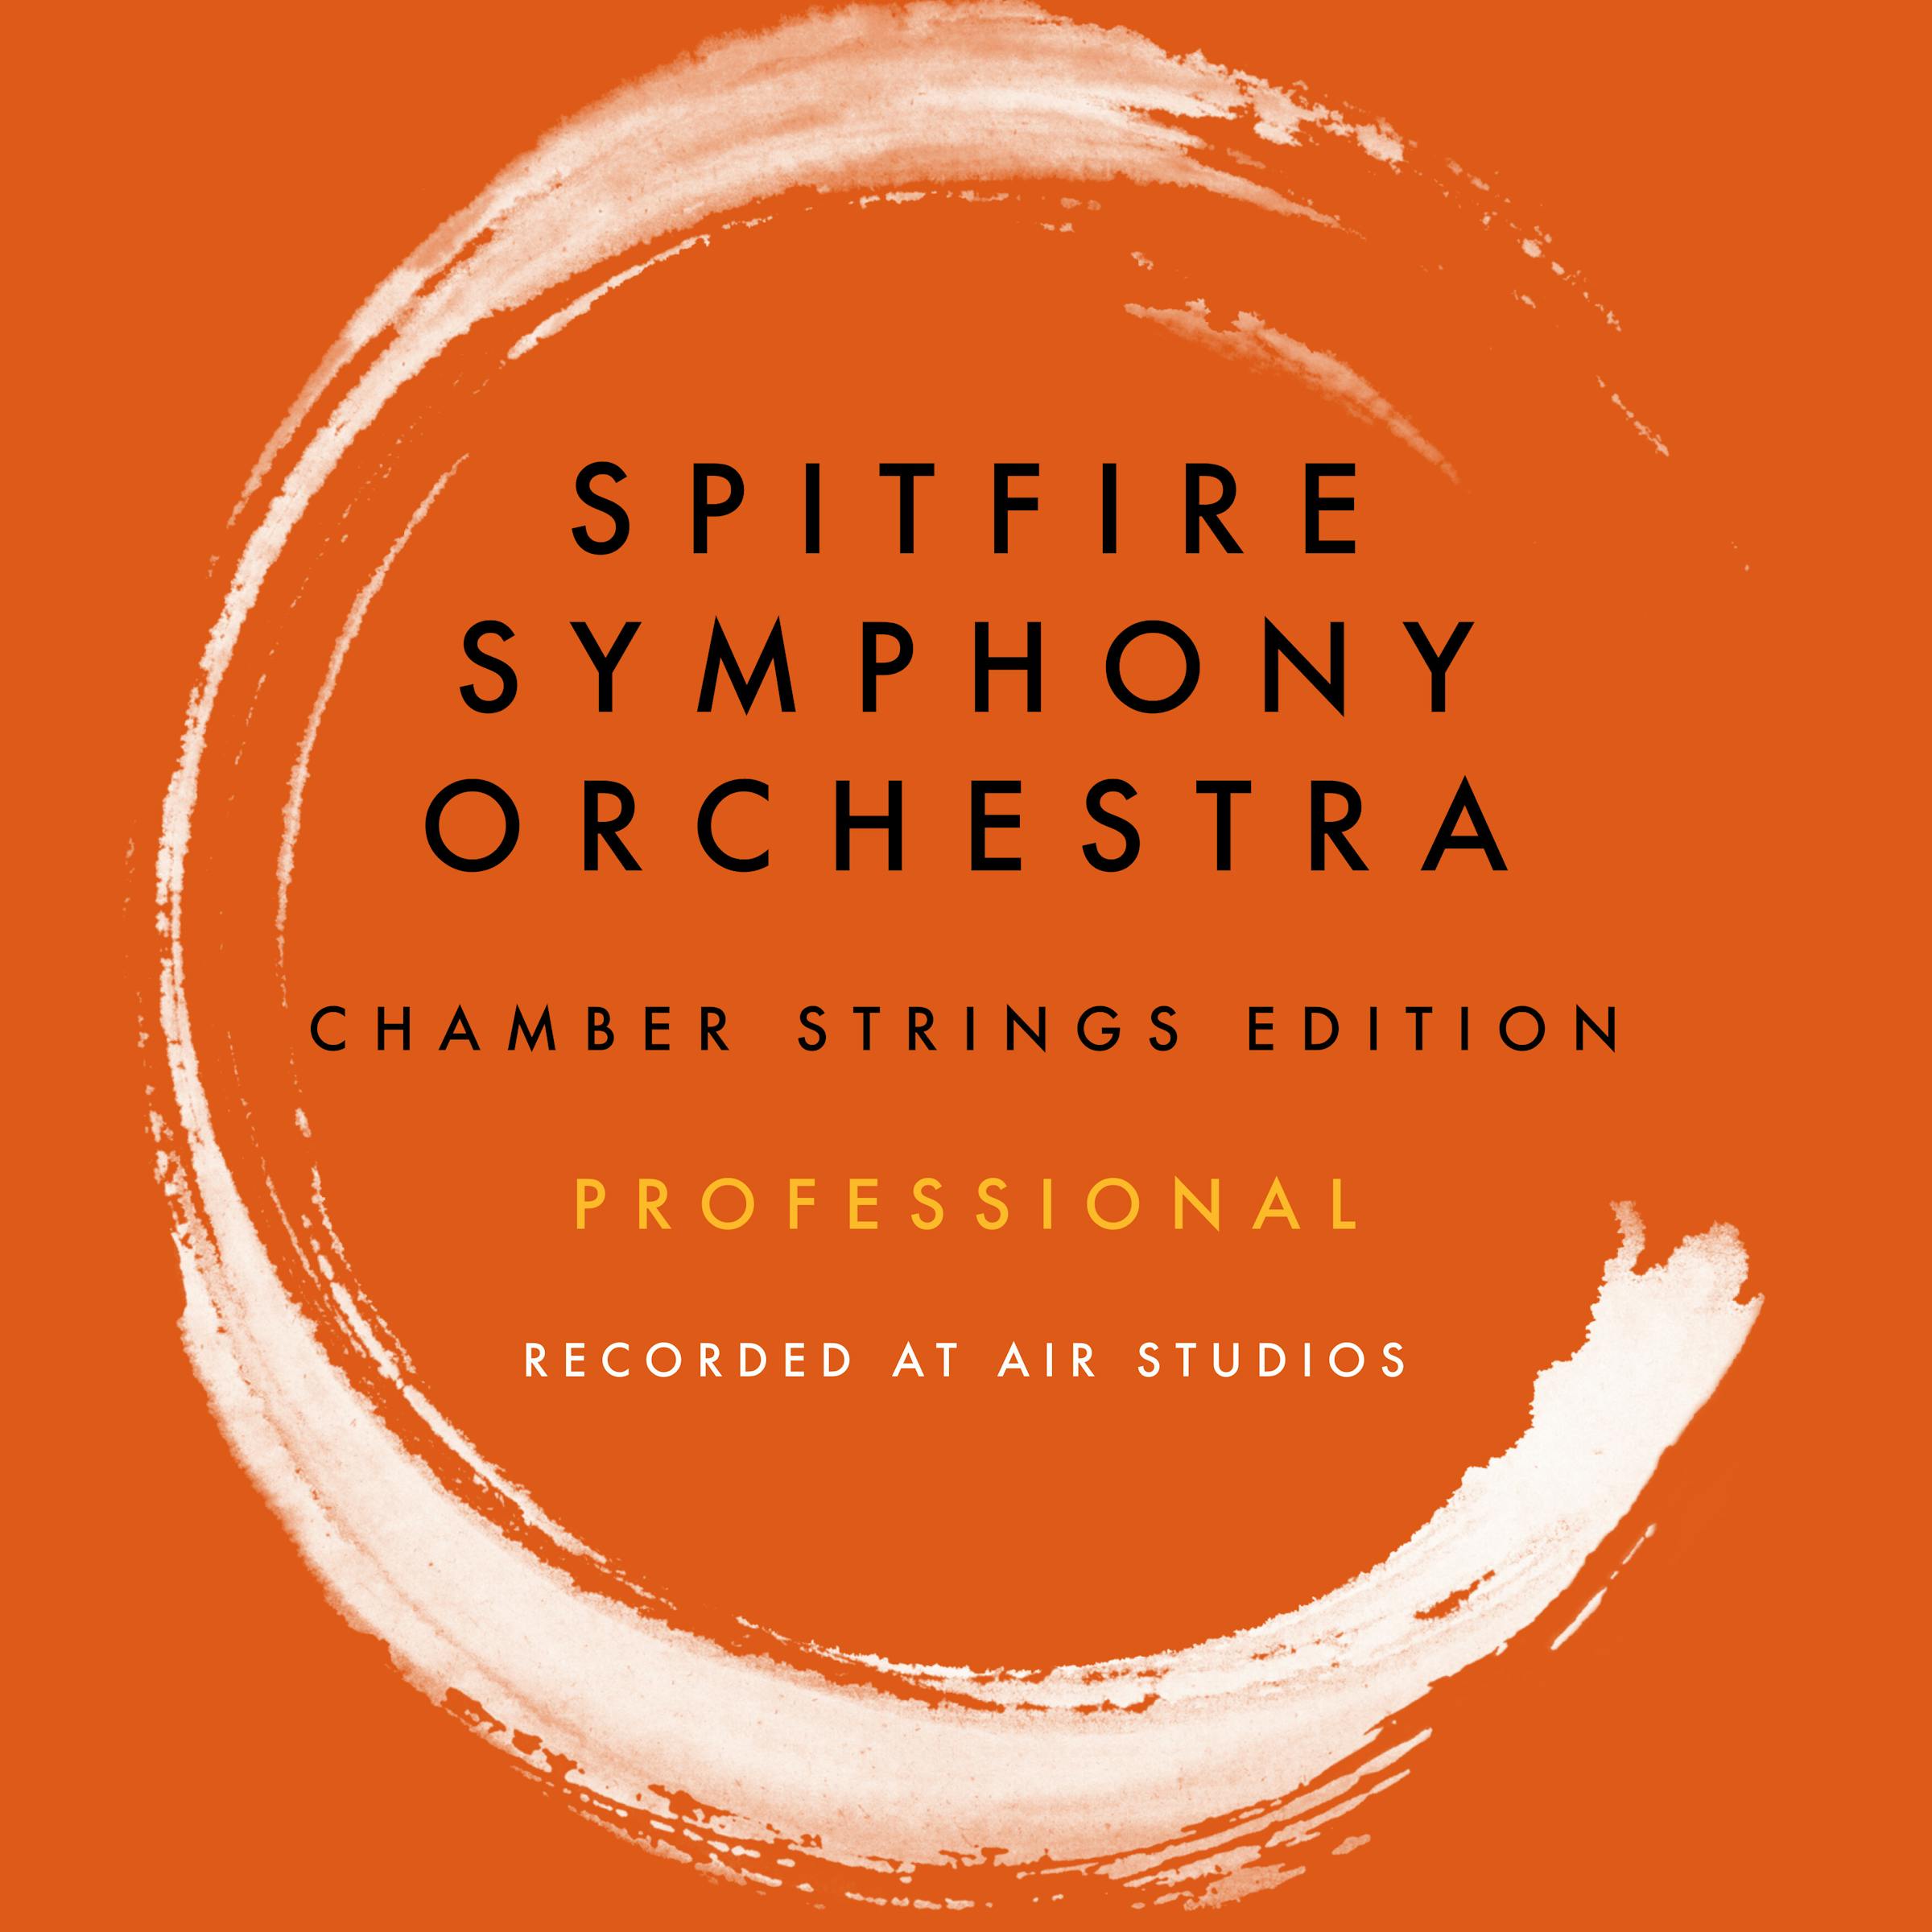 SSO Chamber Strings Edition Professional artwork